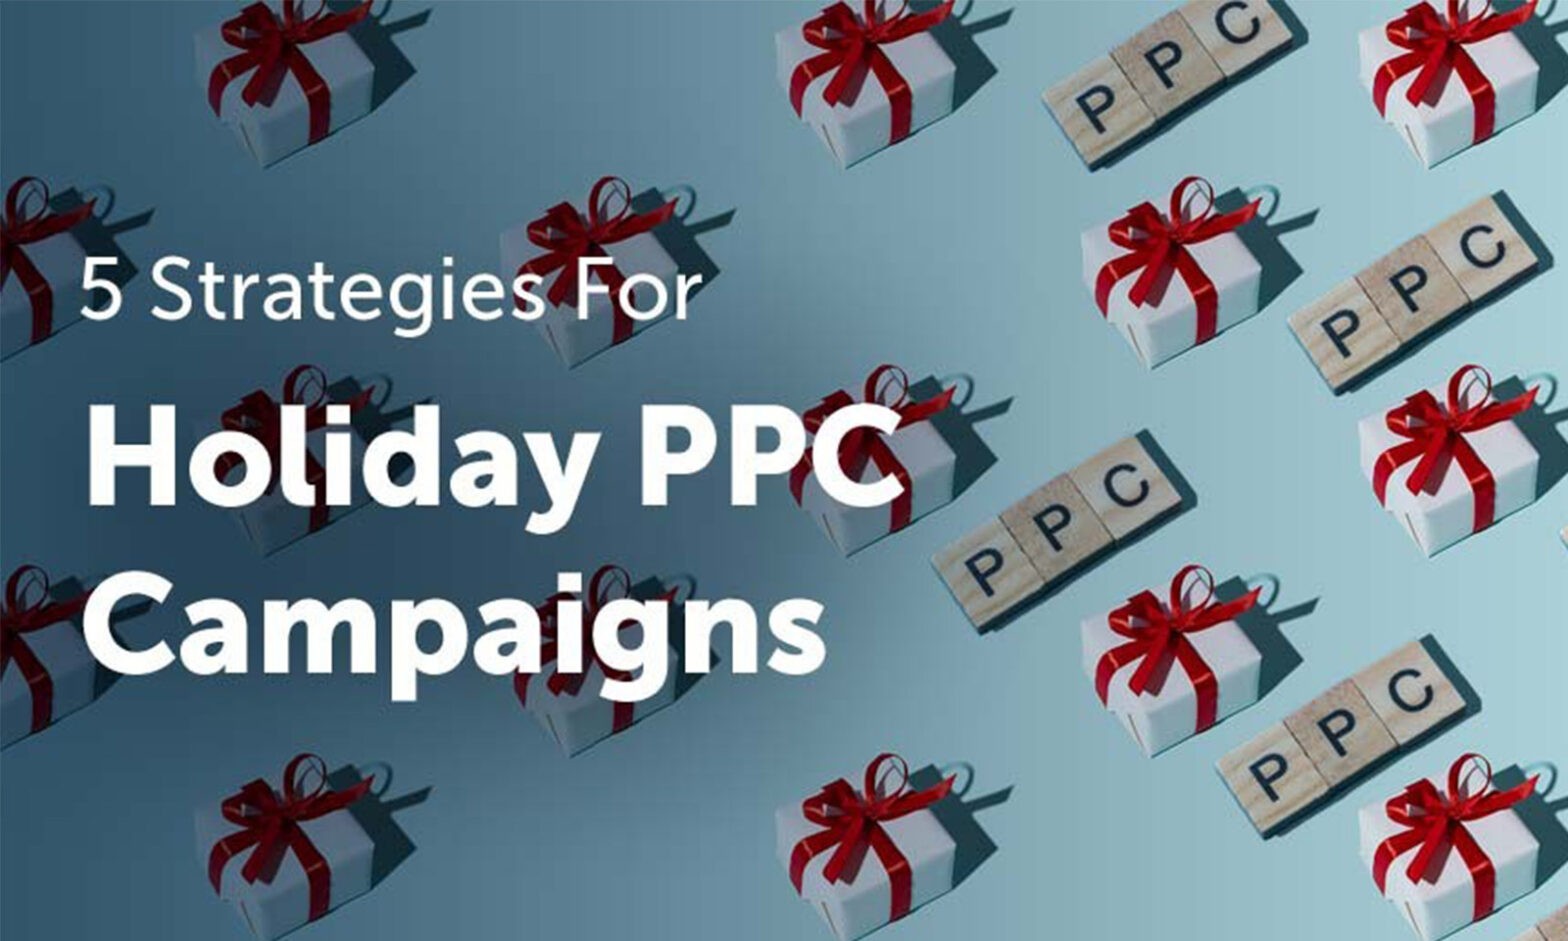 Featured image for post: 5 Strategies for High-Performing Holiday PPC Campaigns